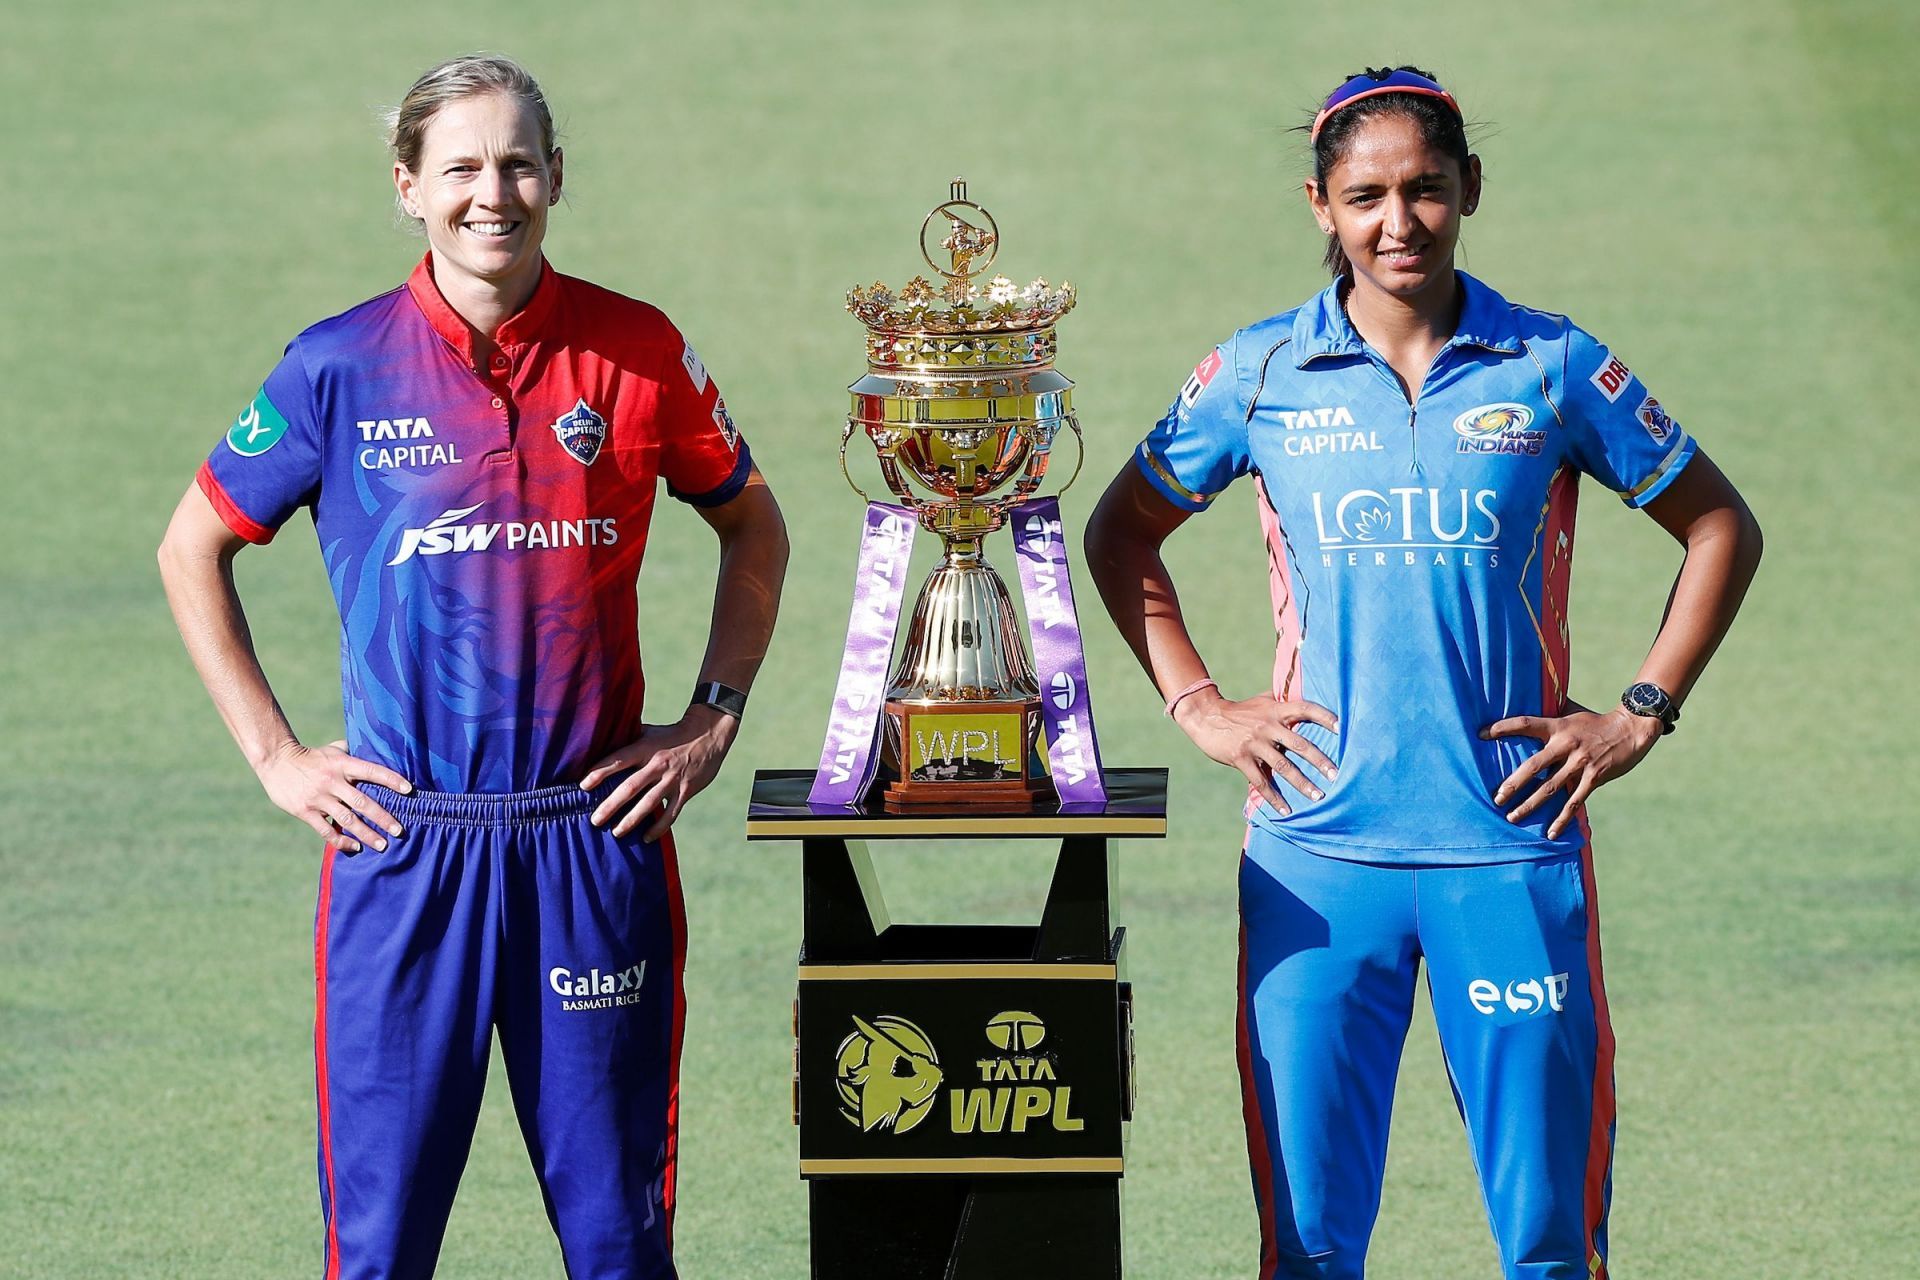 Meg Lanning (L) and Harmanpreet Kaur with the WPL trophy (P.C.:WPL)